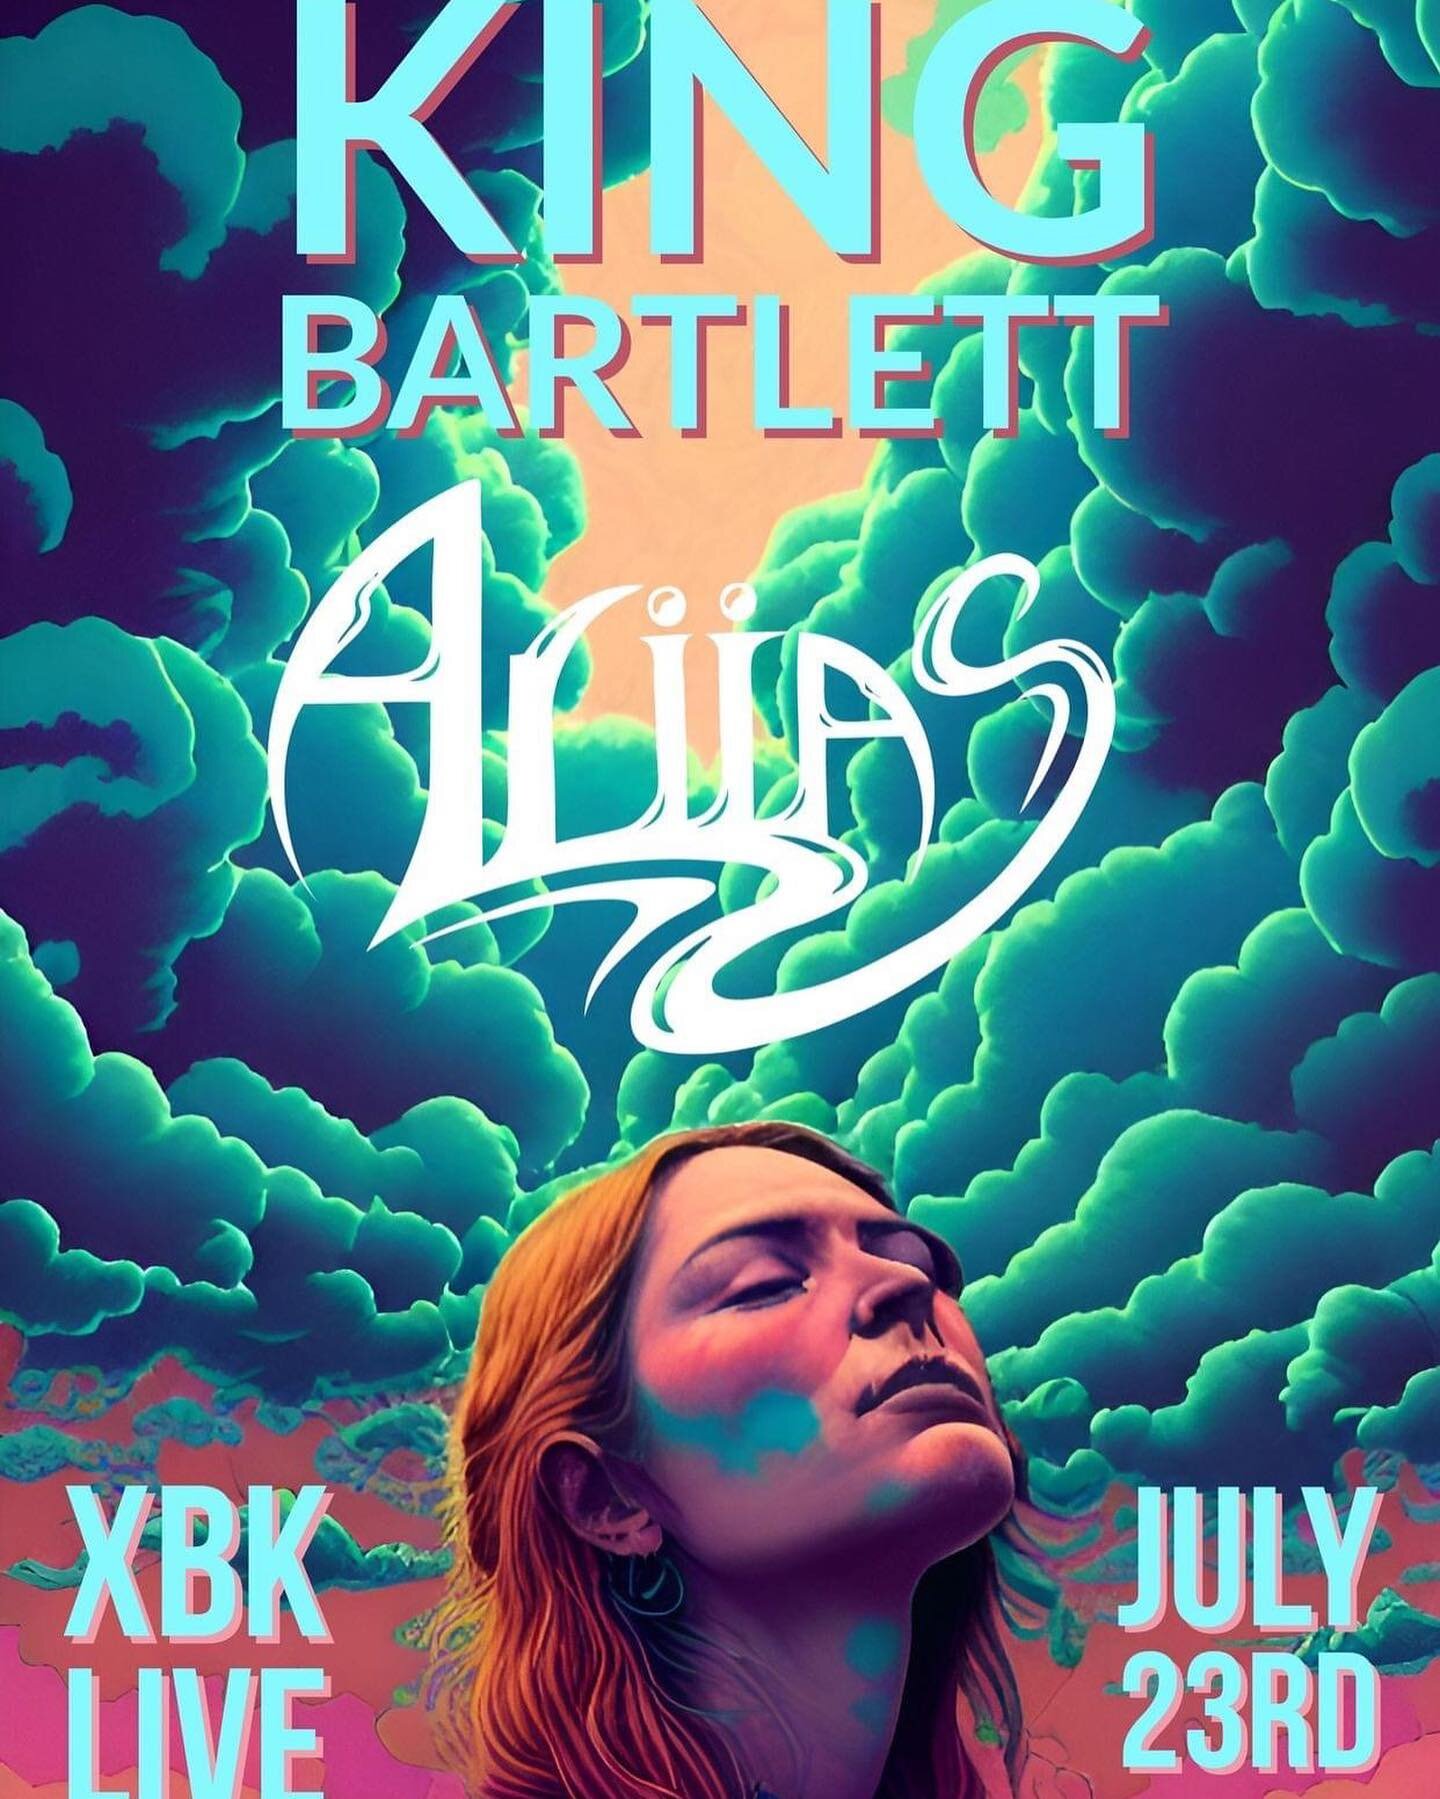 Details via link in bio: Our next Des Moines show is at @xbklive with @kingbartlettmusic! This will be our first show at xBk and with King Bartlett, and we can&rsquo;t wait for the opportunity to play there. Come hang out! Poster by @kingbartlettdan 